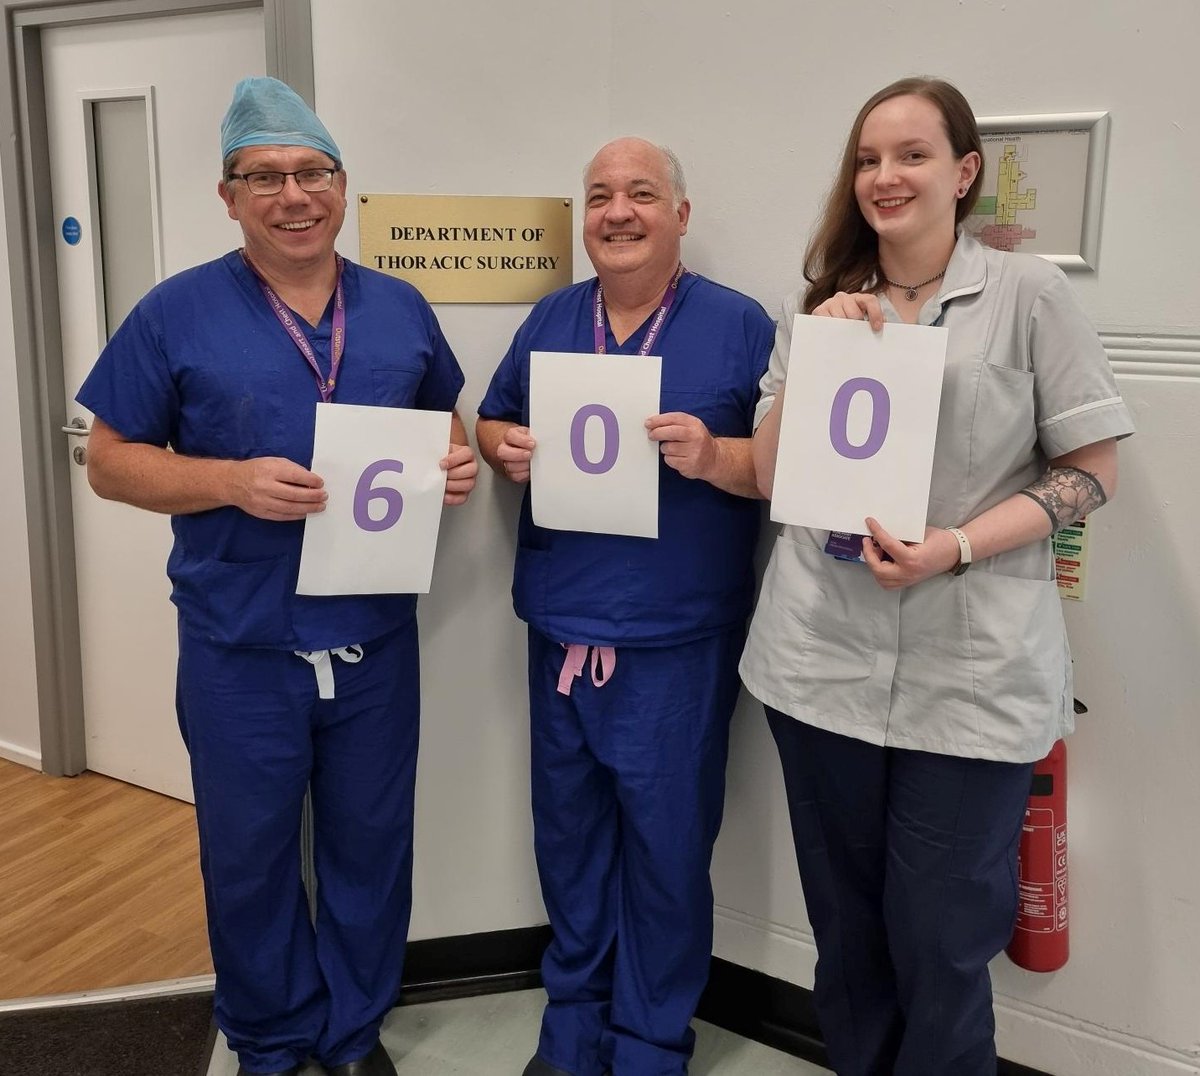 Our LHCH Research Team are thrilled to have recruited our 600th Target Lung participant at LHCH this week (actually our 602nd!). The first recruit was in January 2020 and here we are just over 4 years (including a pandemic) later. Well done to all involved.👏 #TeamLHCH